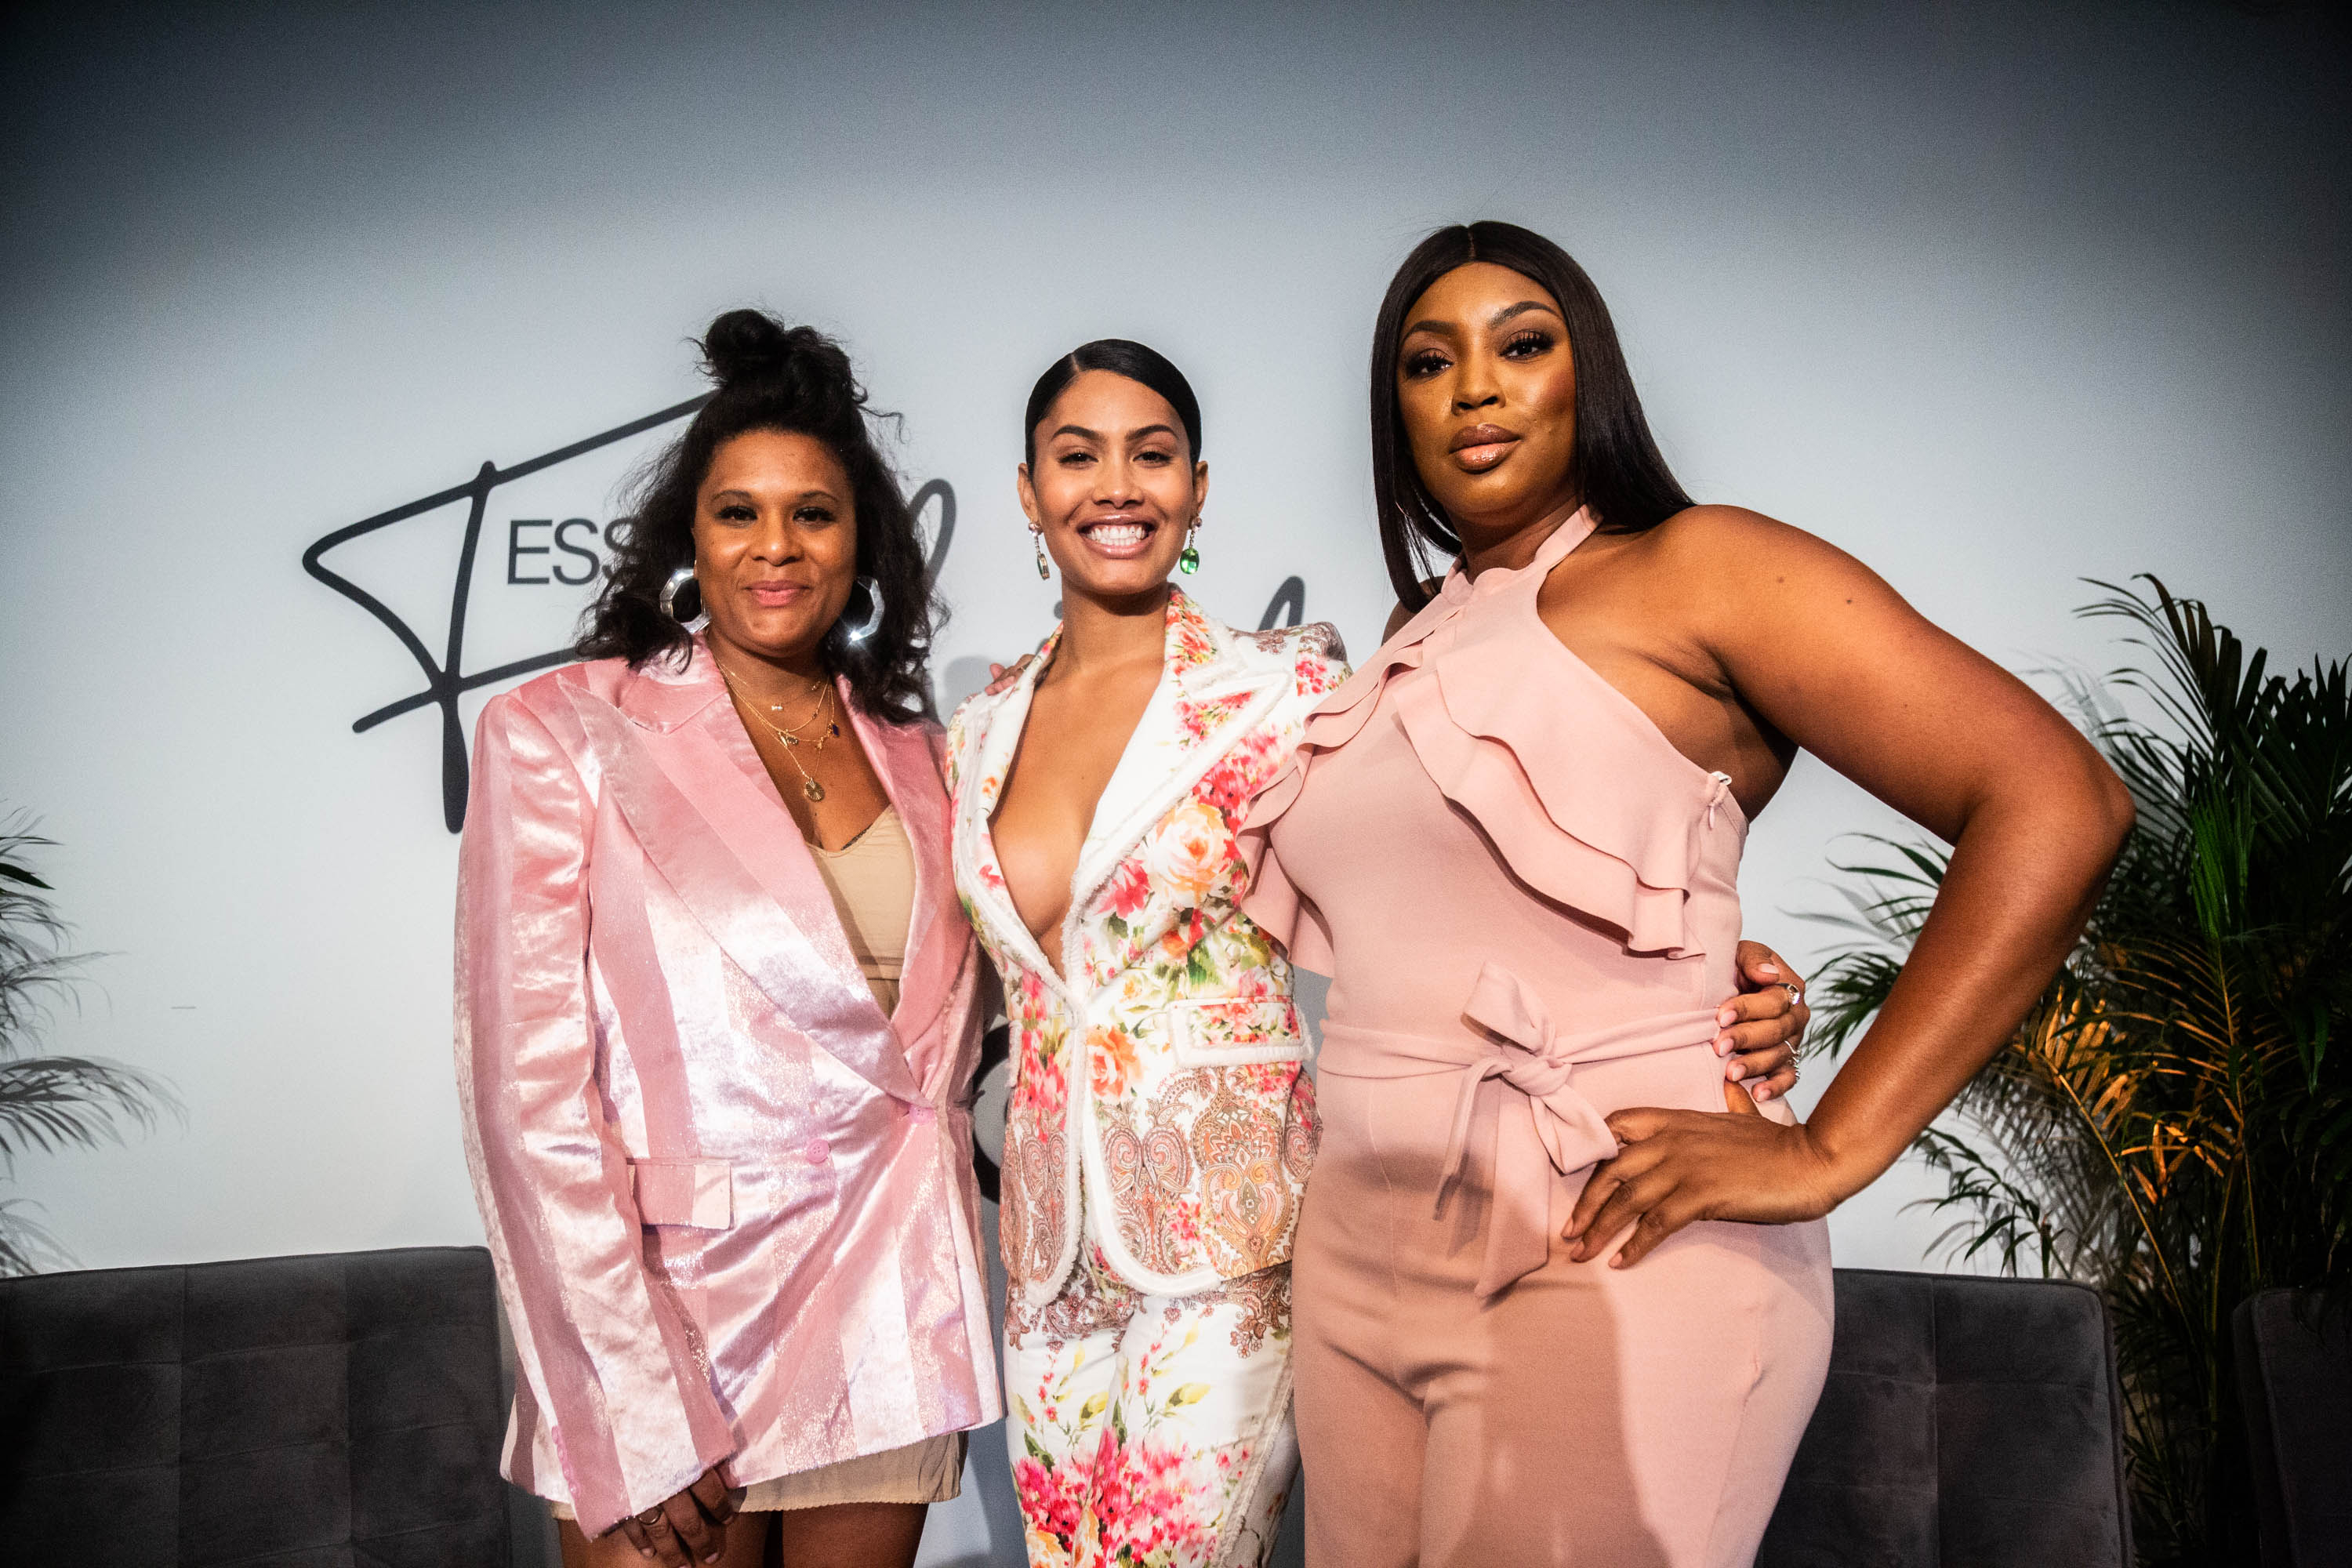 ESSENCE Fashion House NYC: Models Leyna Bloom And Liris Crosse Talk Redefining Beauty Standards In Fashion